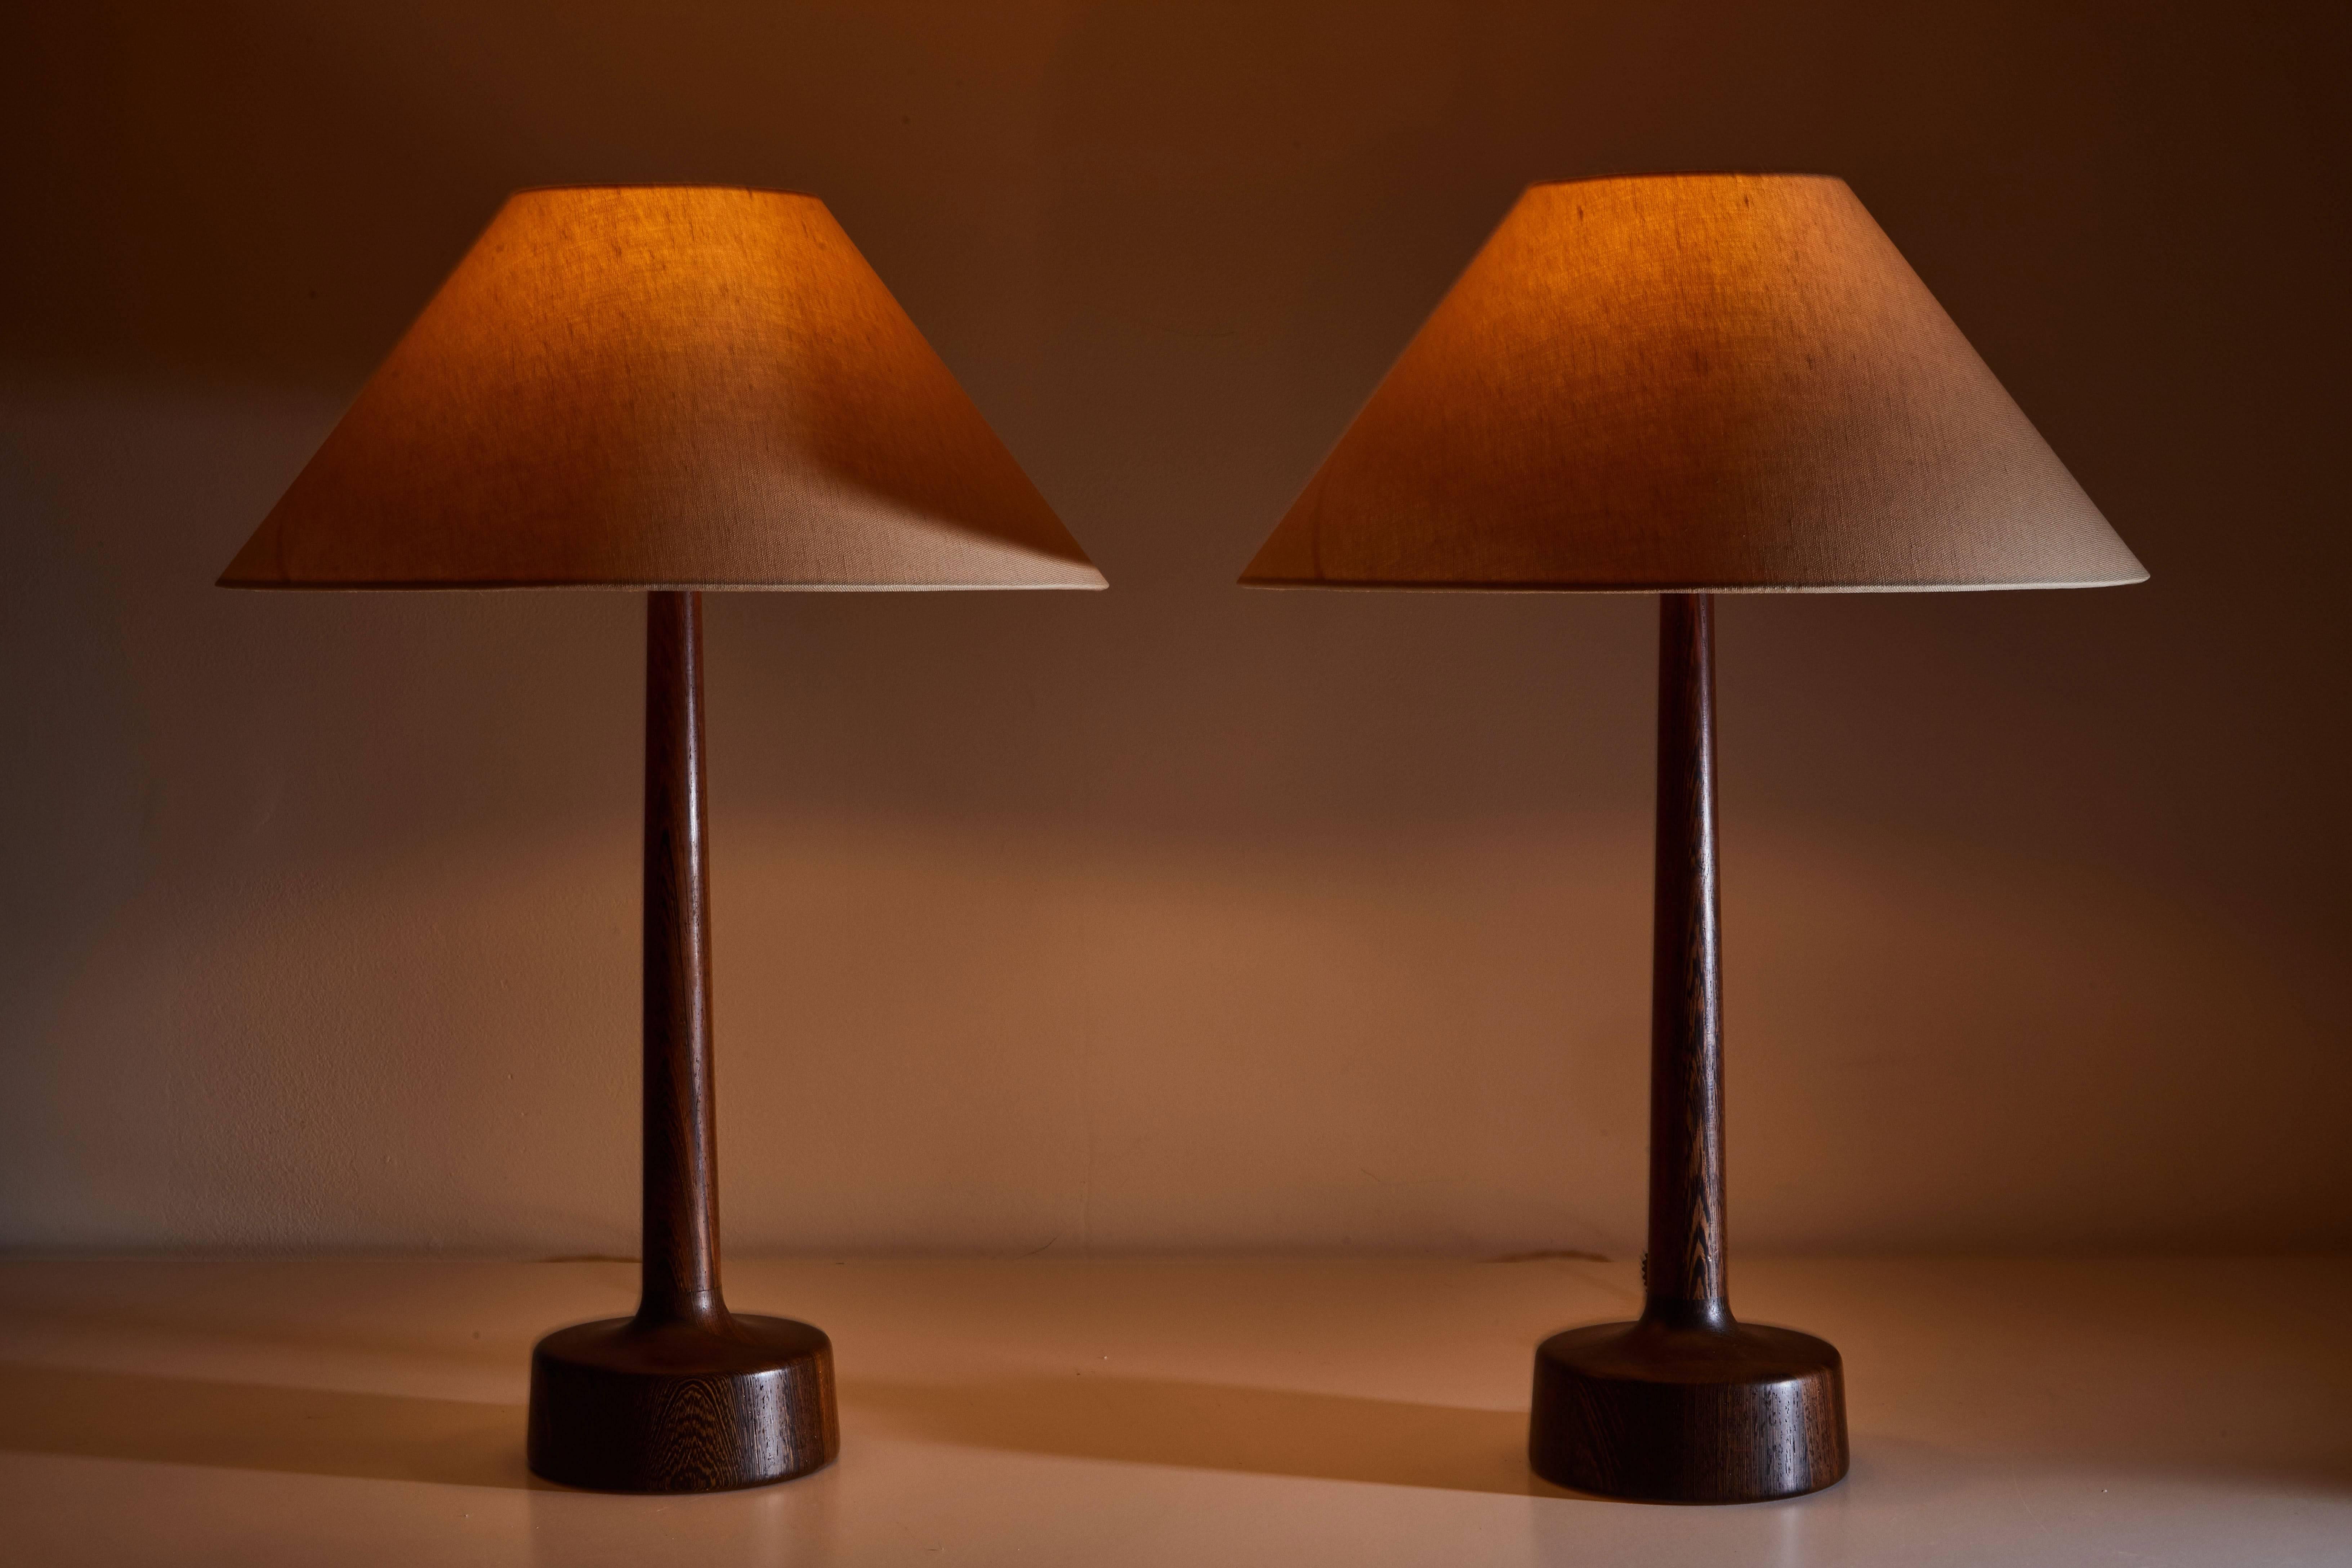 Pair of wengé wood table lamps made in Denmark, circa 1960s. Comes with custom linen shades. Rewired with French twist silk cord. Each Lamp takes one E27 75w maximum bulb.